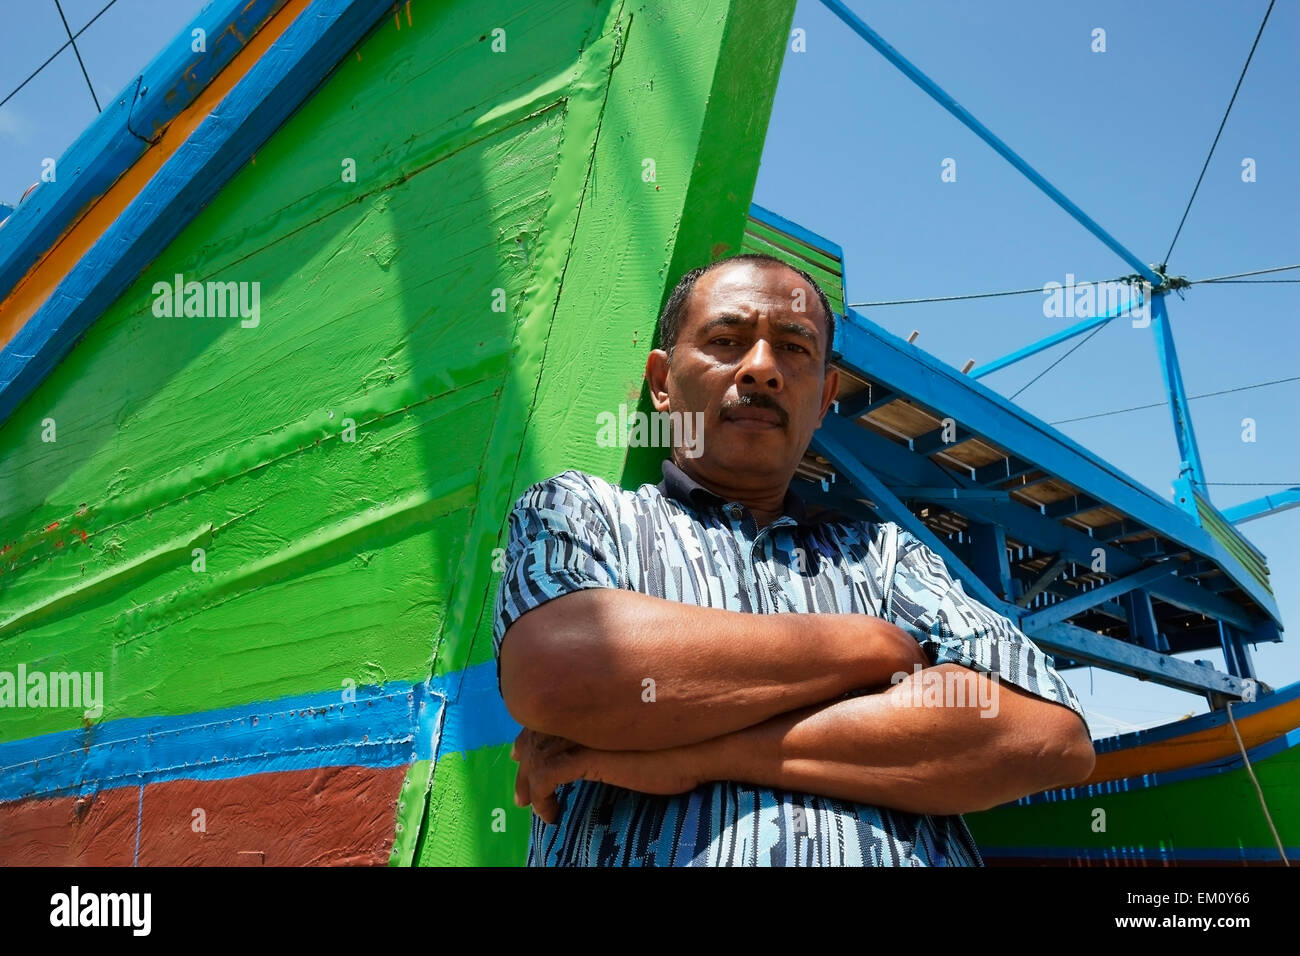 A fisherman stands with his colourful fishing boat in Lhok Seudu village; Aceh Province, Sumatra, Indonesia Stock Photo